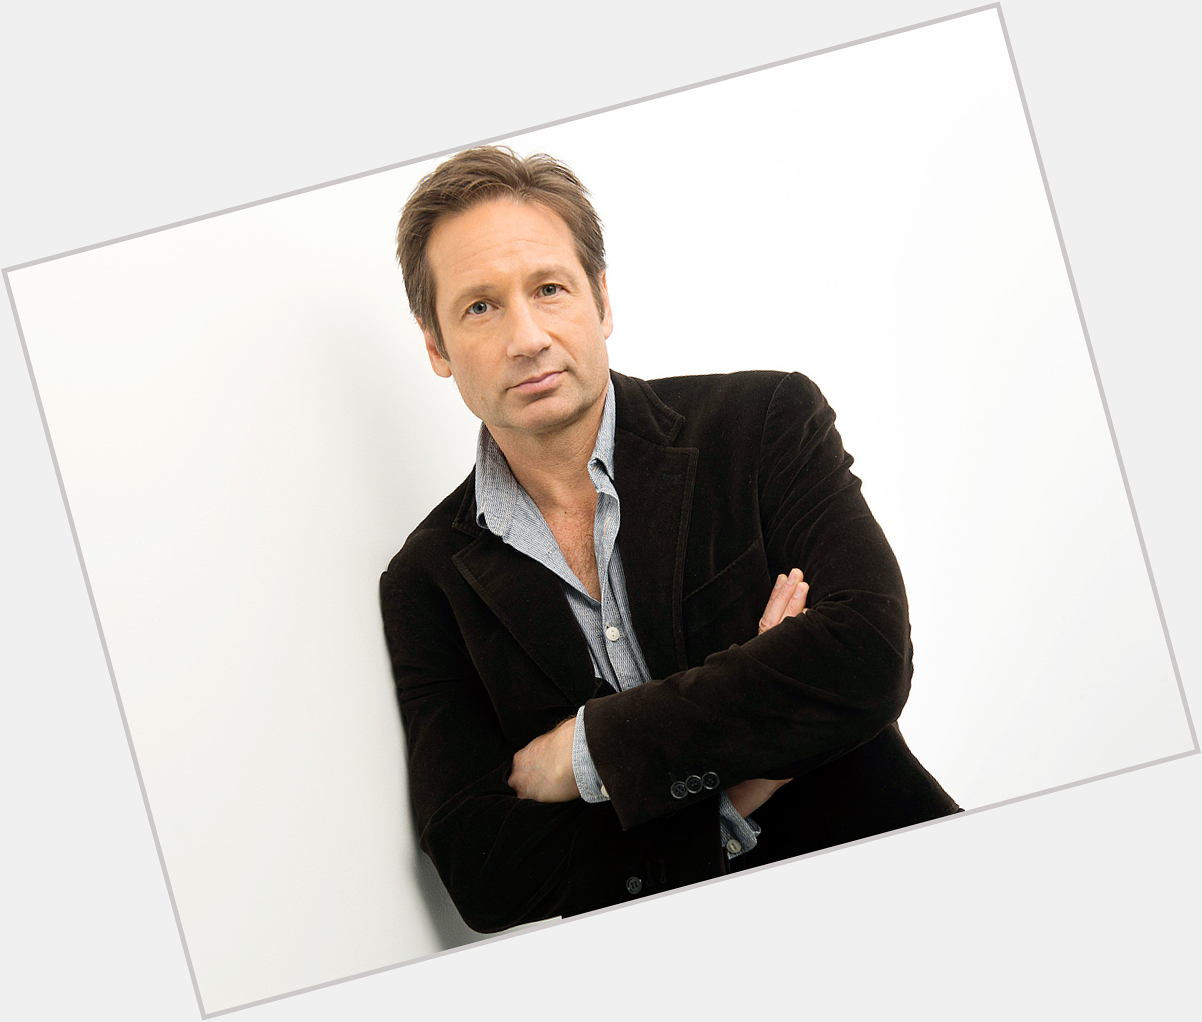 August 7, 2020
Happy birthday David Duchovny 60 years old. 